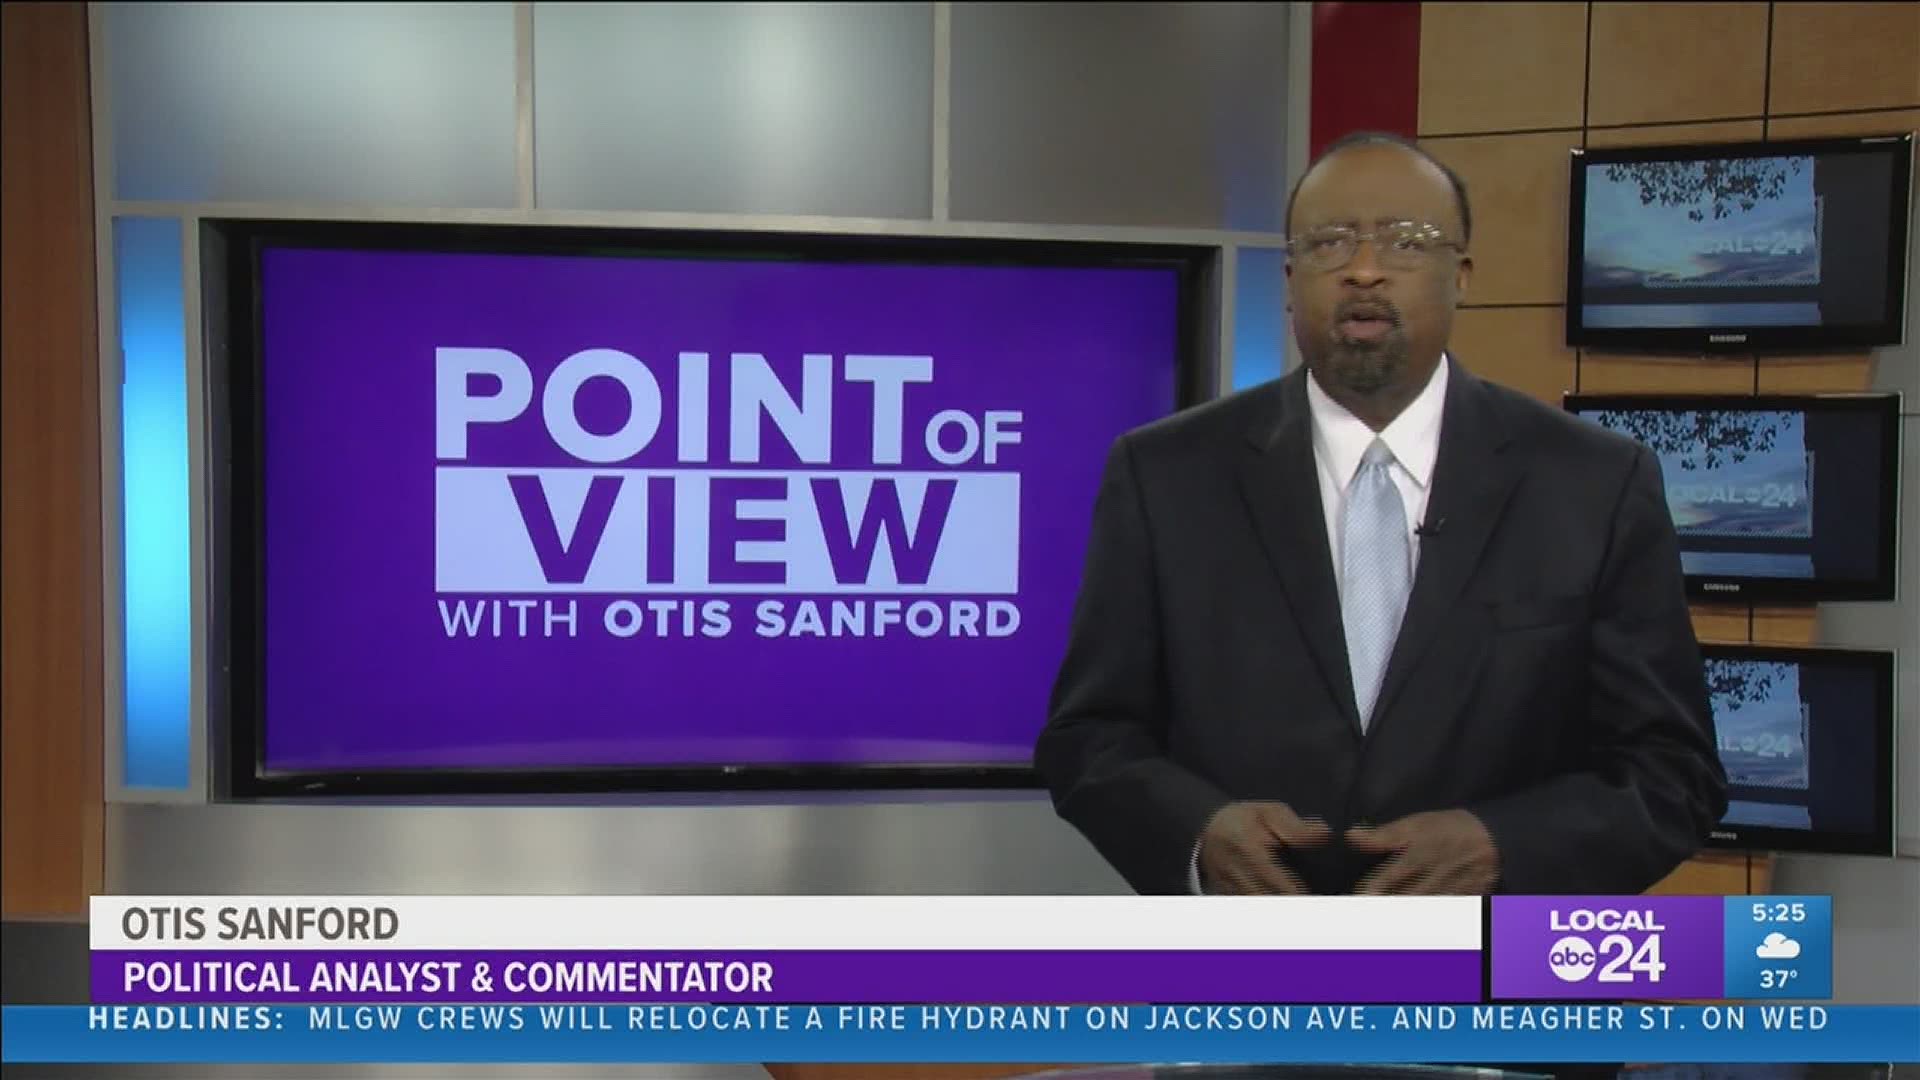 Local 24 News political analyst and commentator Otis Sanford shares his point of view on the future of the Memphis Police Department.